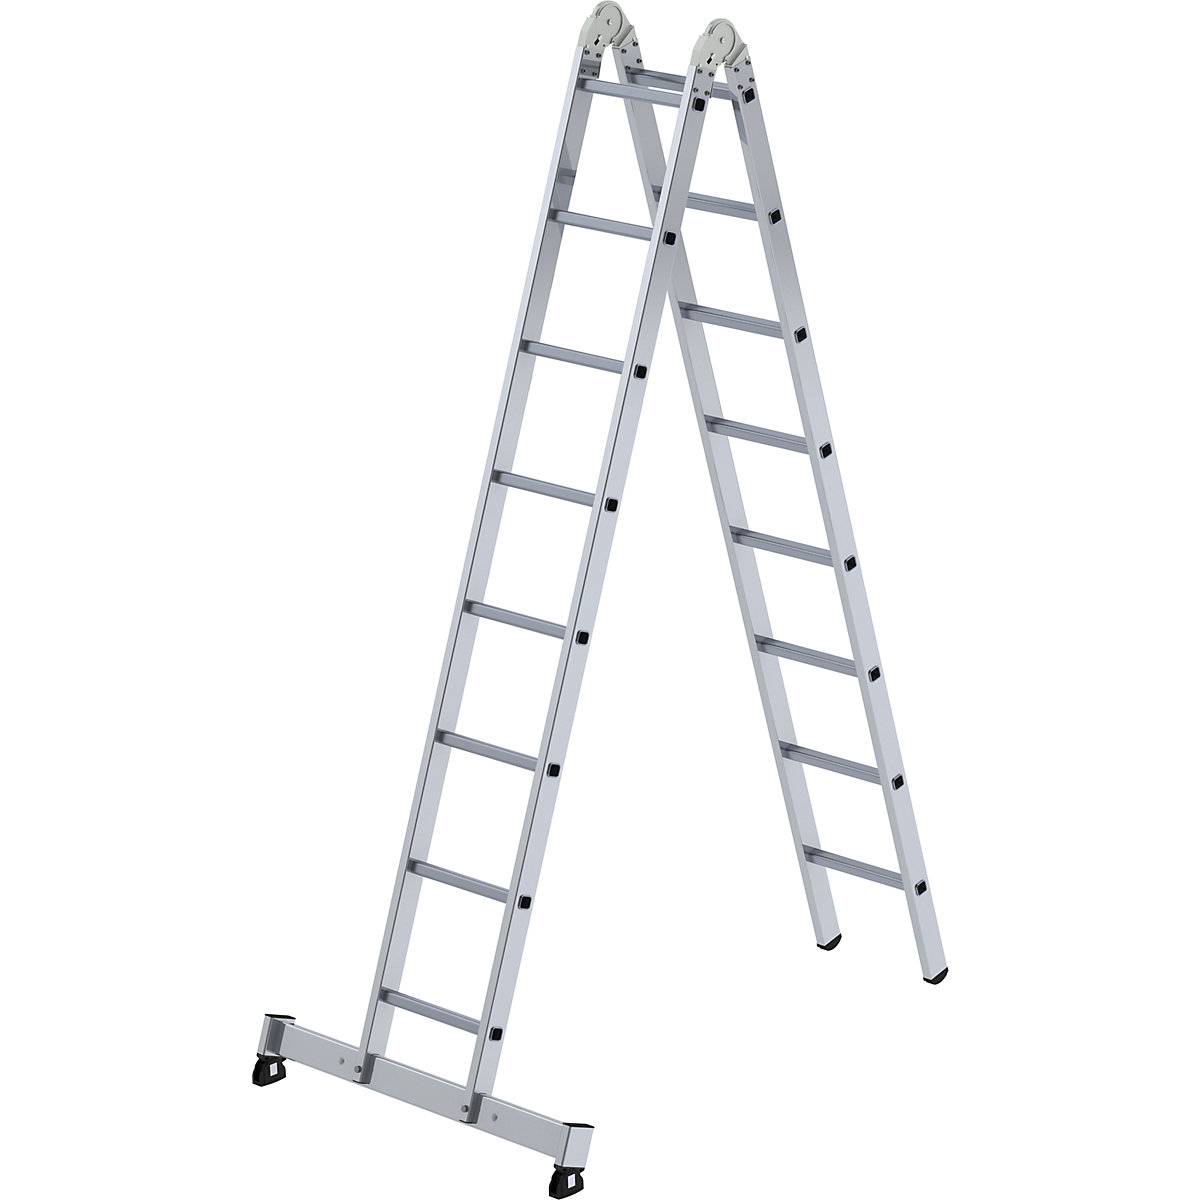 Aluminium folding ladder – MUNK, can be used as step or lean-to ladder, 2 x 8 rungs-2